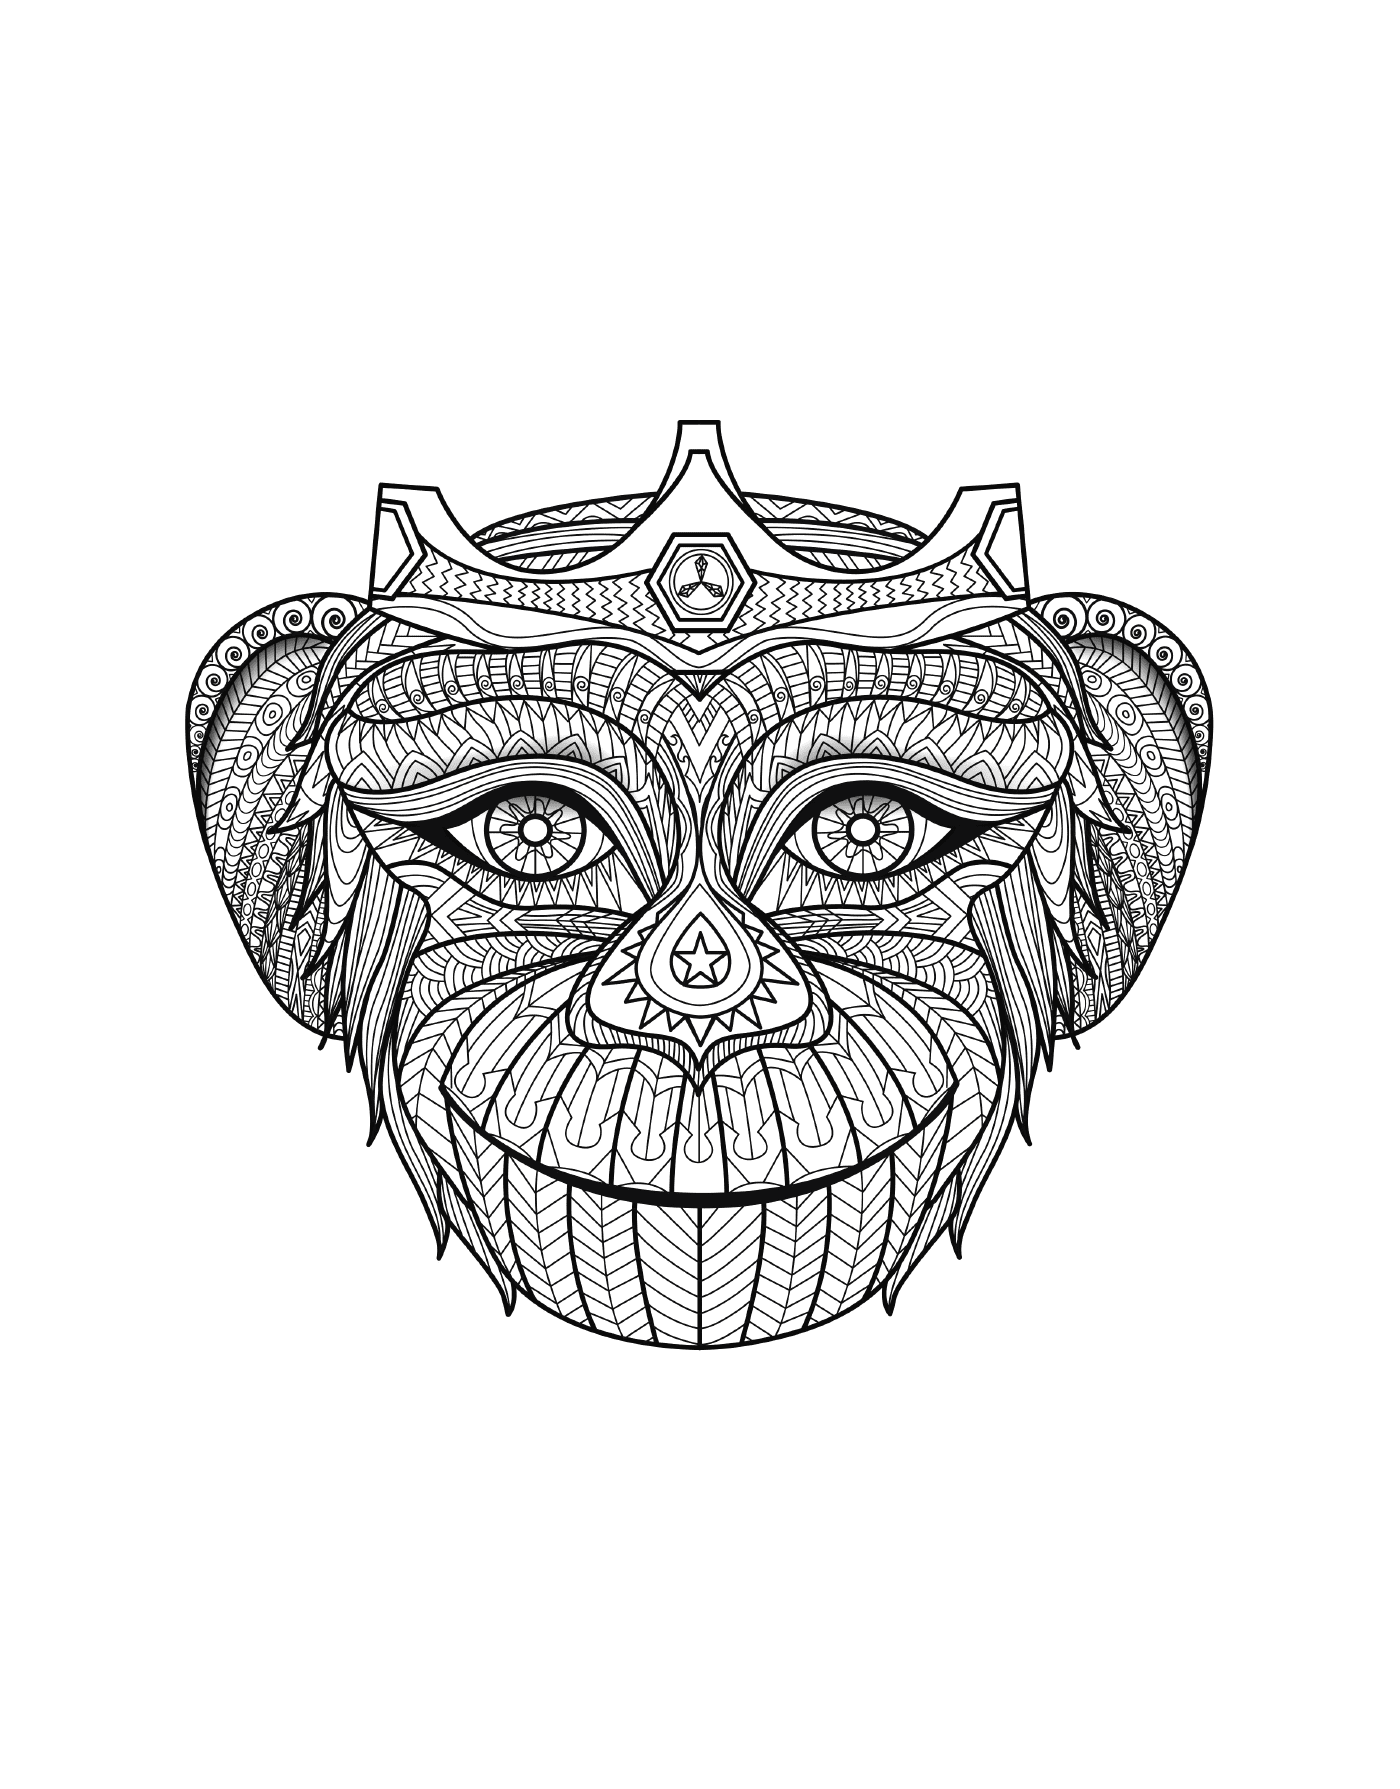  A monkey with a crown 